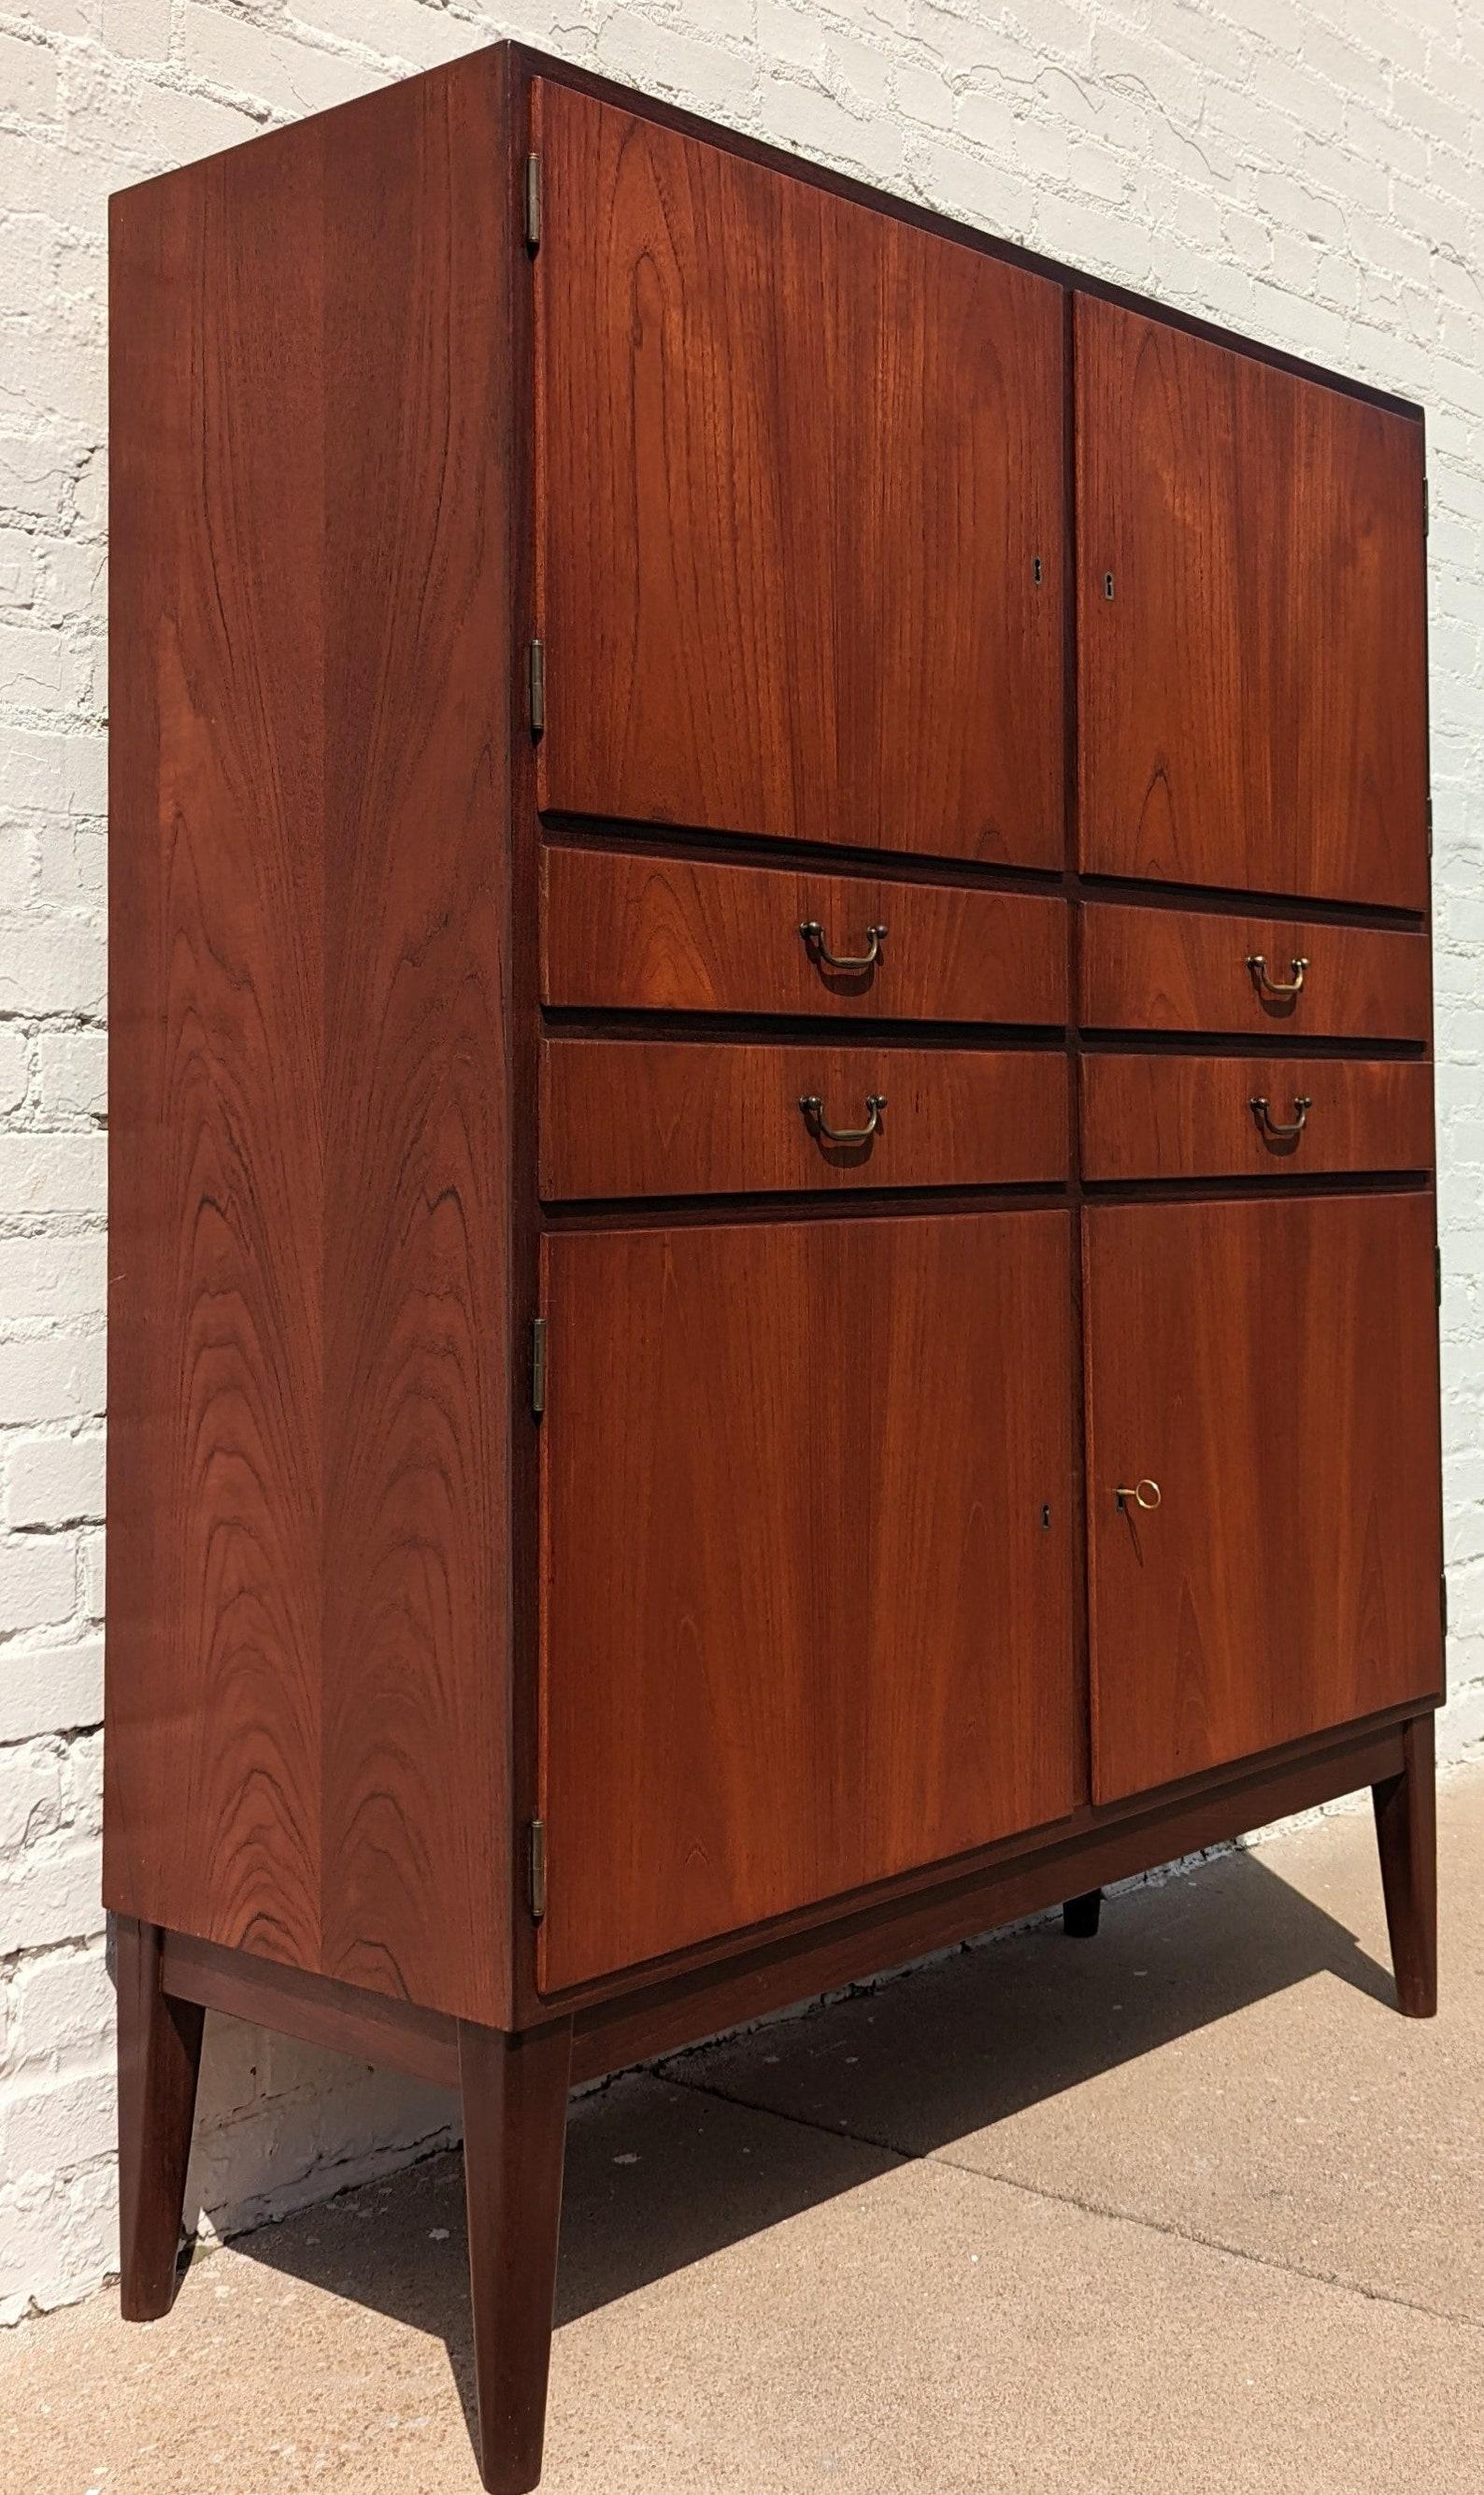 Mid Century Danish Modern Teak Tall Cabinet

Attributed to McIntosh. Above average vintage condition and structurally sound. Has some expected slight finish wear and scratching. Very well constructed. Outdoor listing pictures might appear slightly